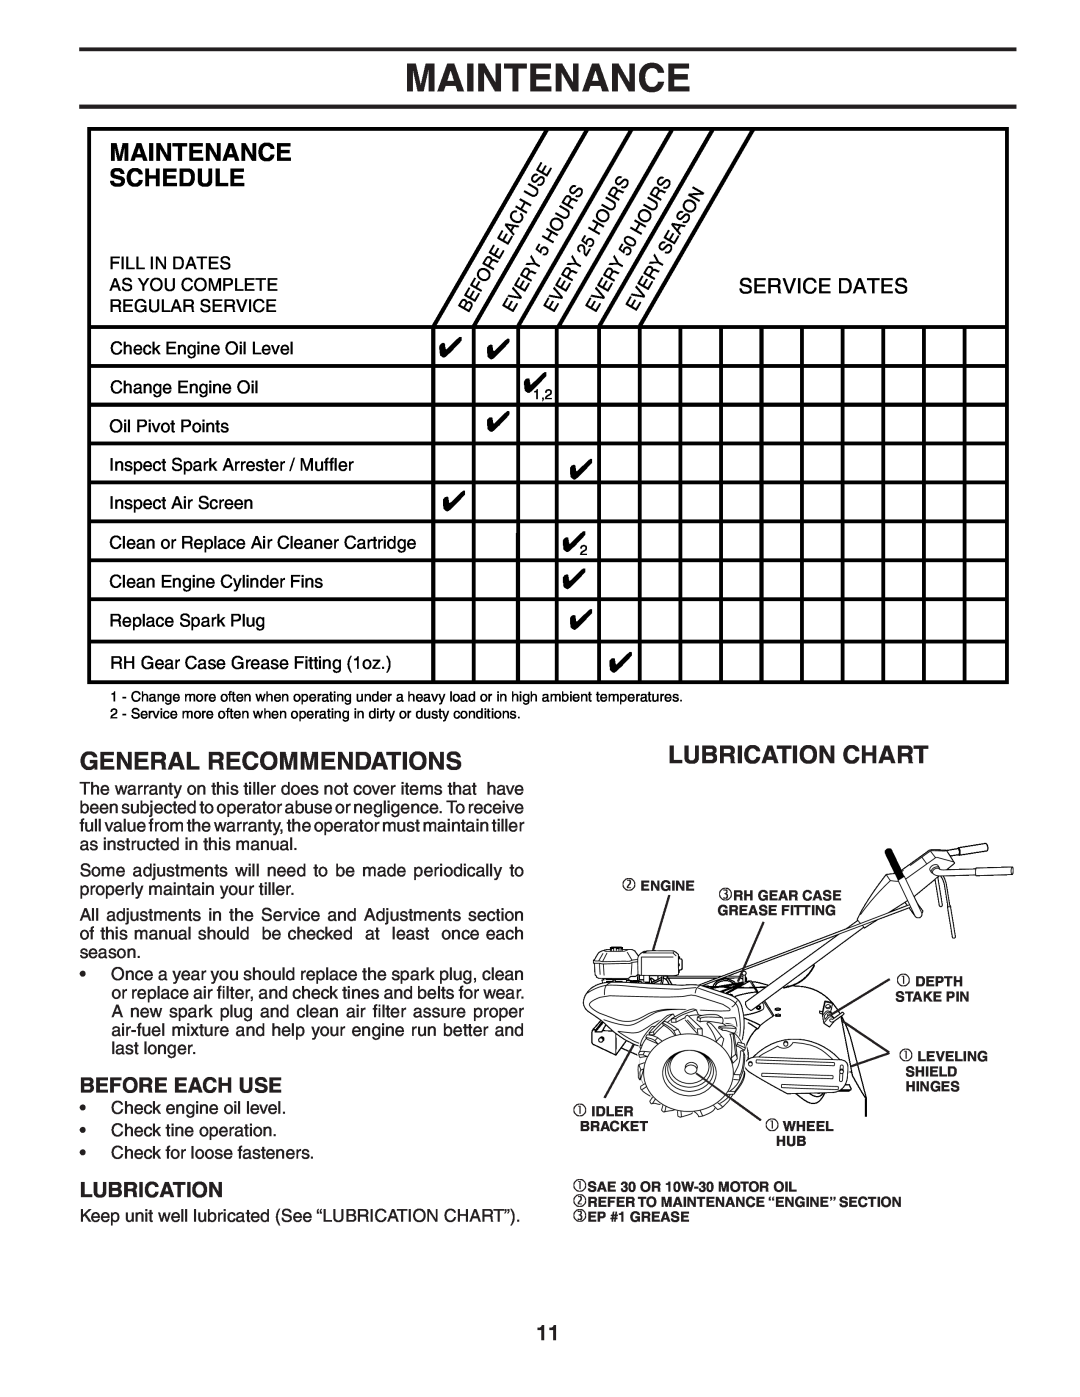 Poulan 96092000400 manual Maintenance, Schedule, General Recommendations, Lubrication Chart, Before Each Use, Service Dates 